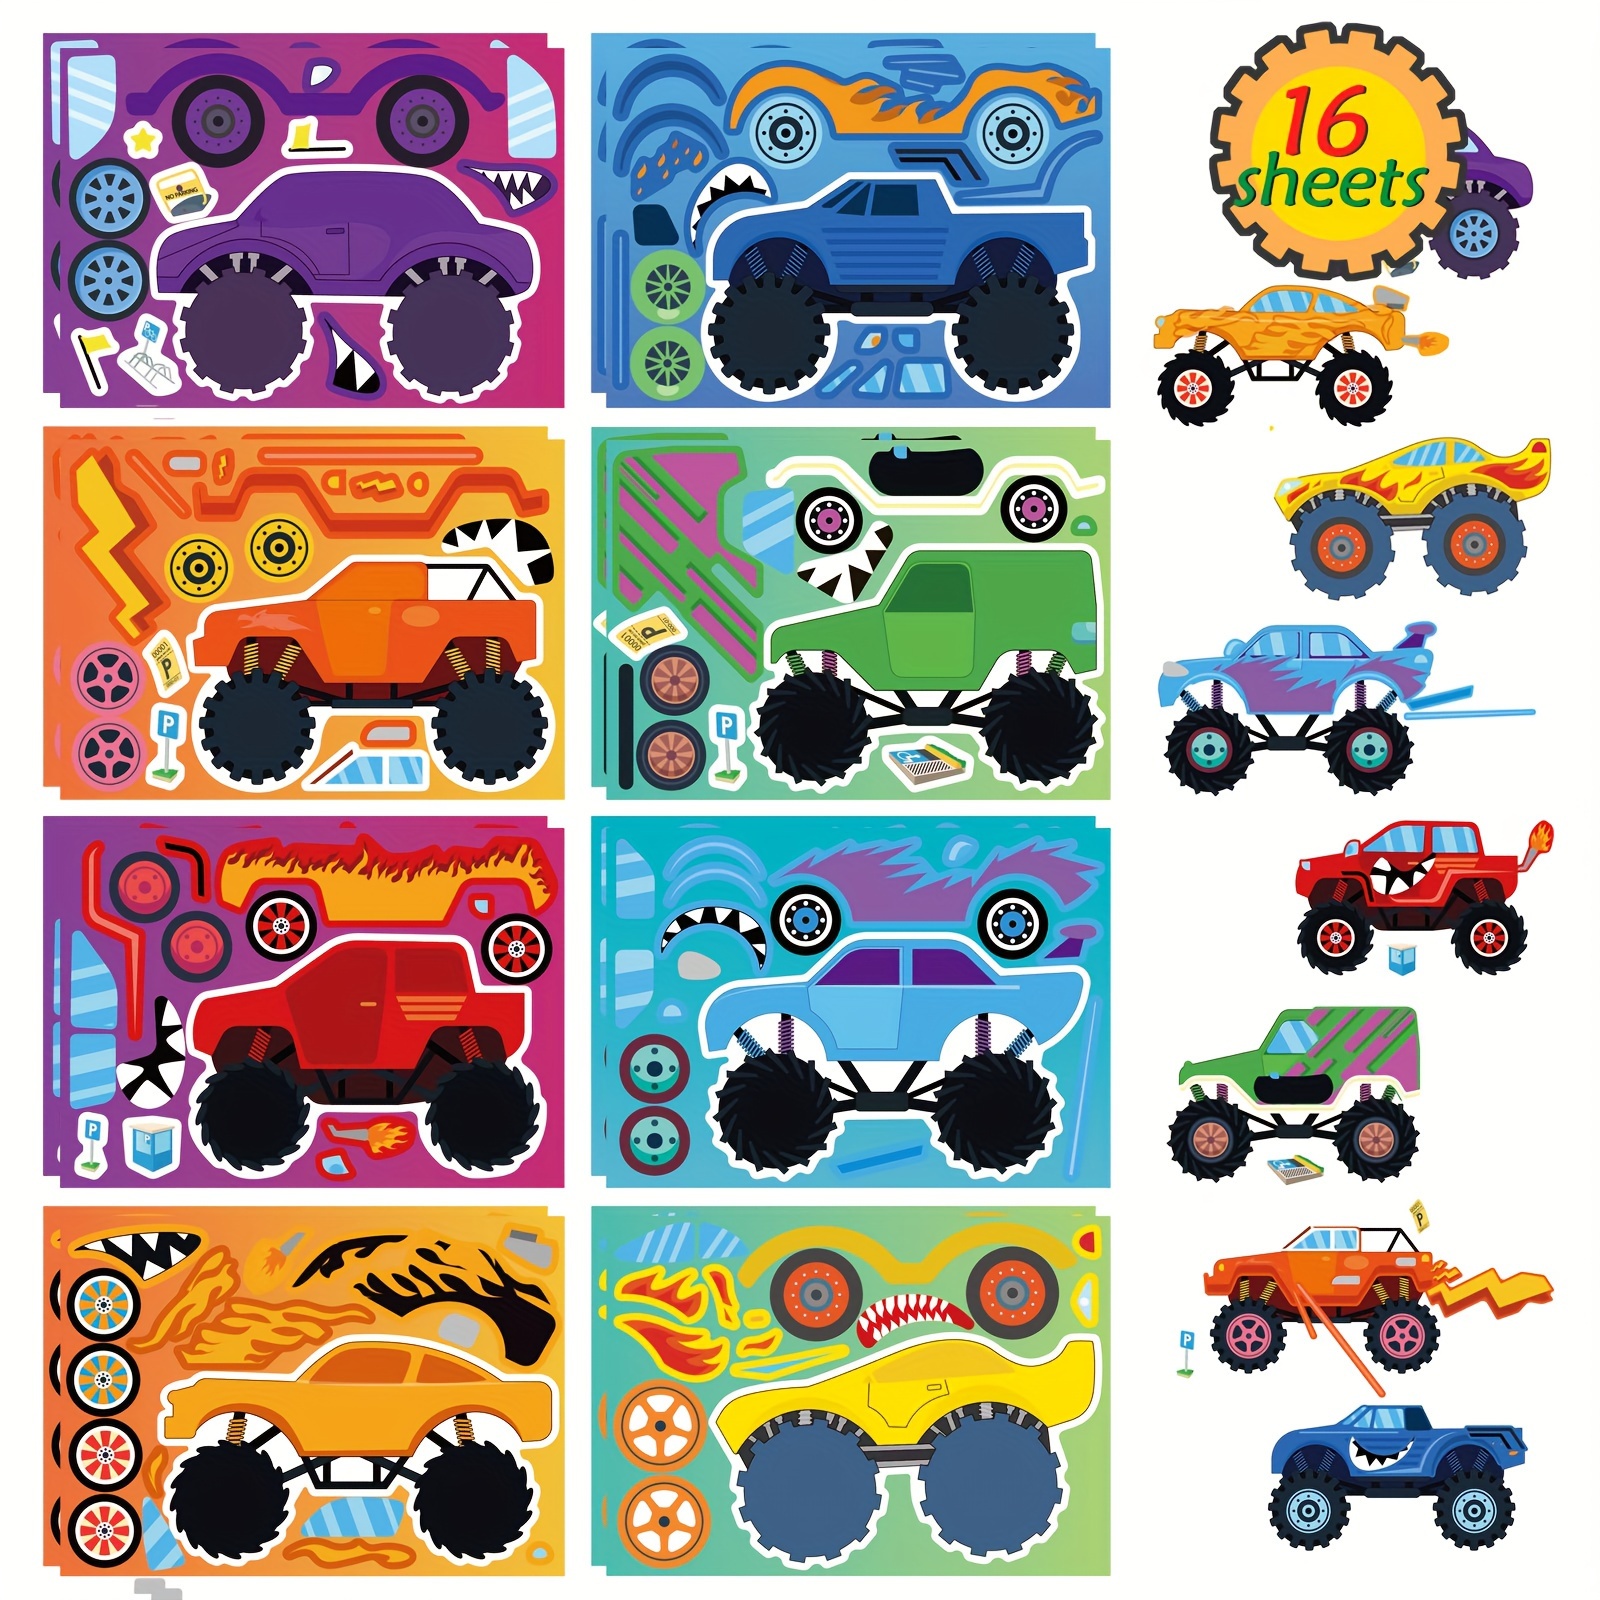 

16 Sheets Monster Truck Make Your Own Stickers With 8 Designs, Monster Truck-themed Birthday Party Decoration